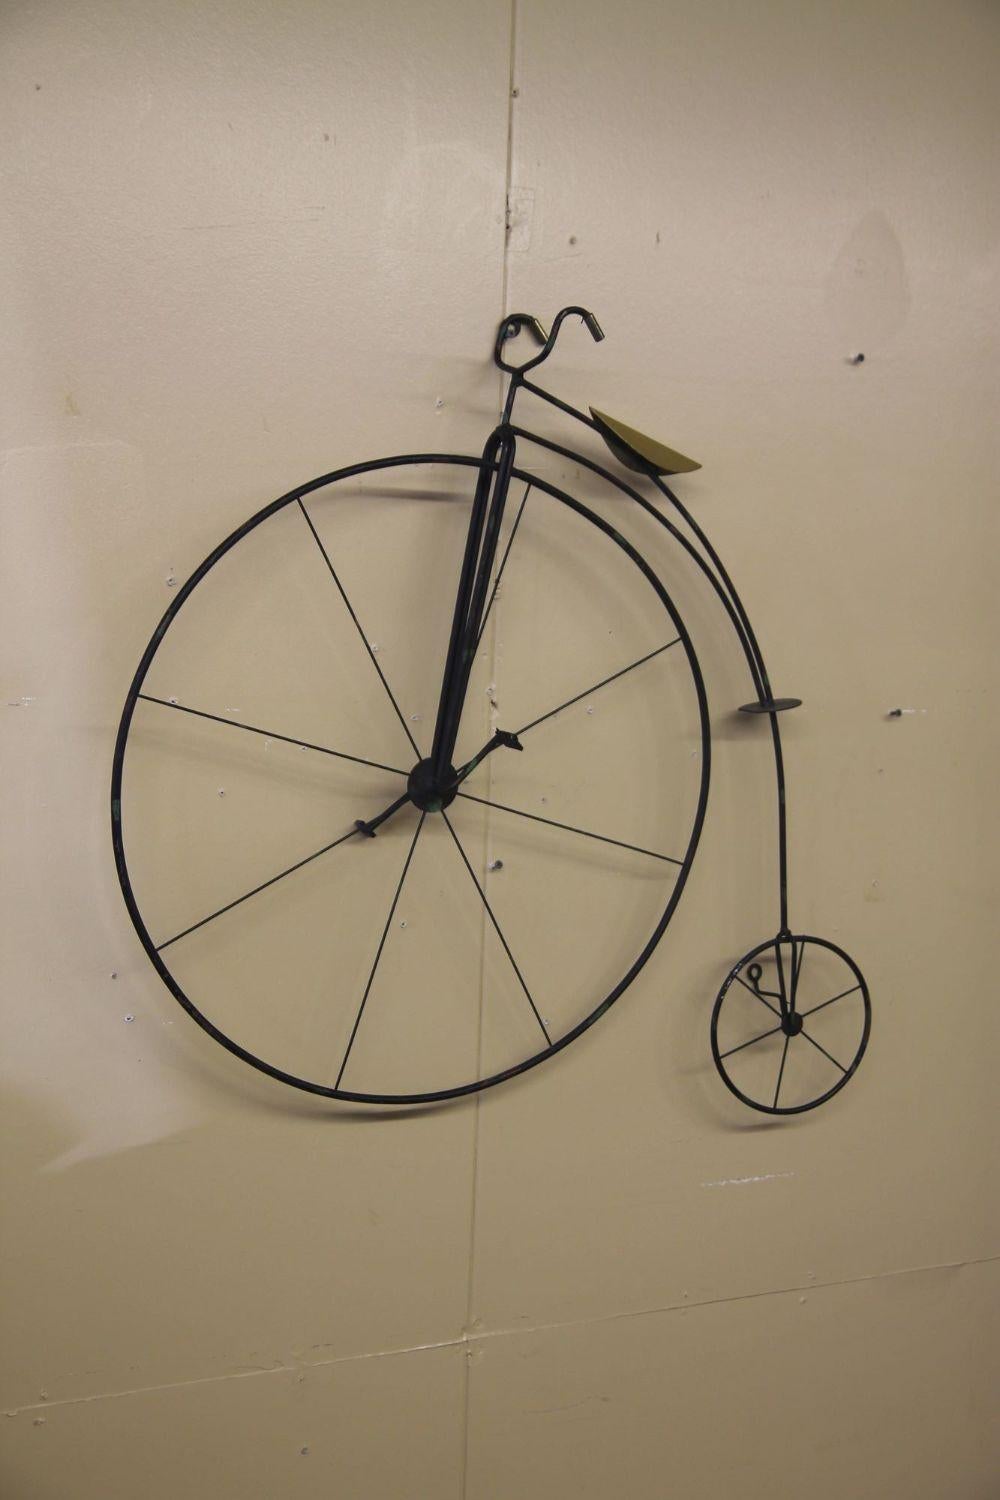 Pleased to offer this wall hanging high wheel metal bike sculpture by Curtis Jere. This piece is marked 1992. The black bike has a nice brass seat.